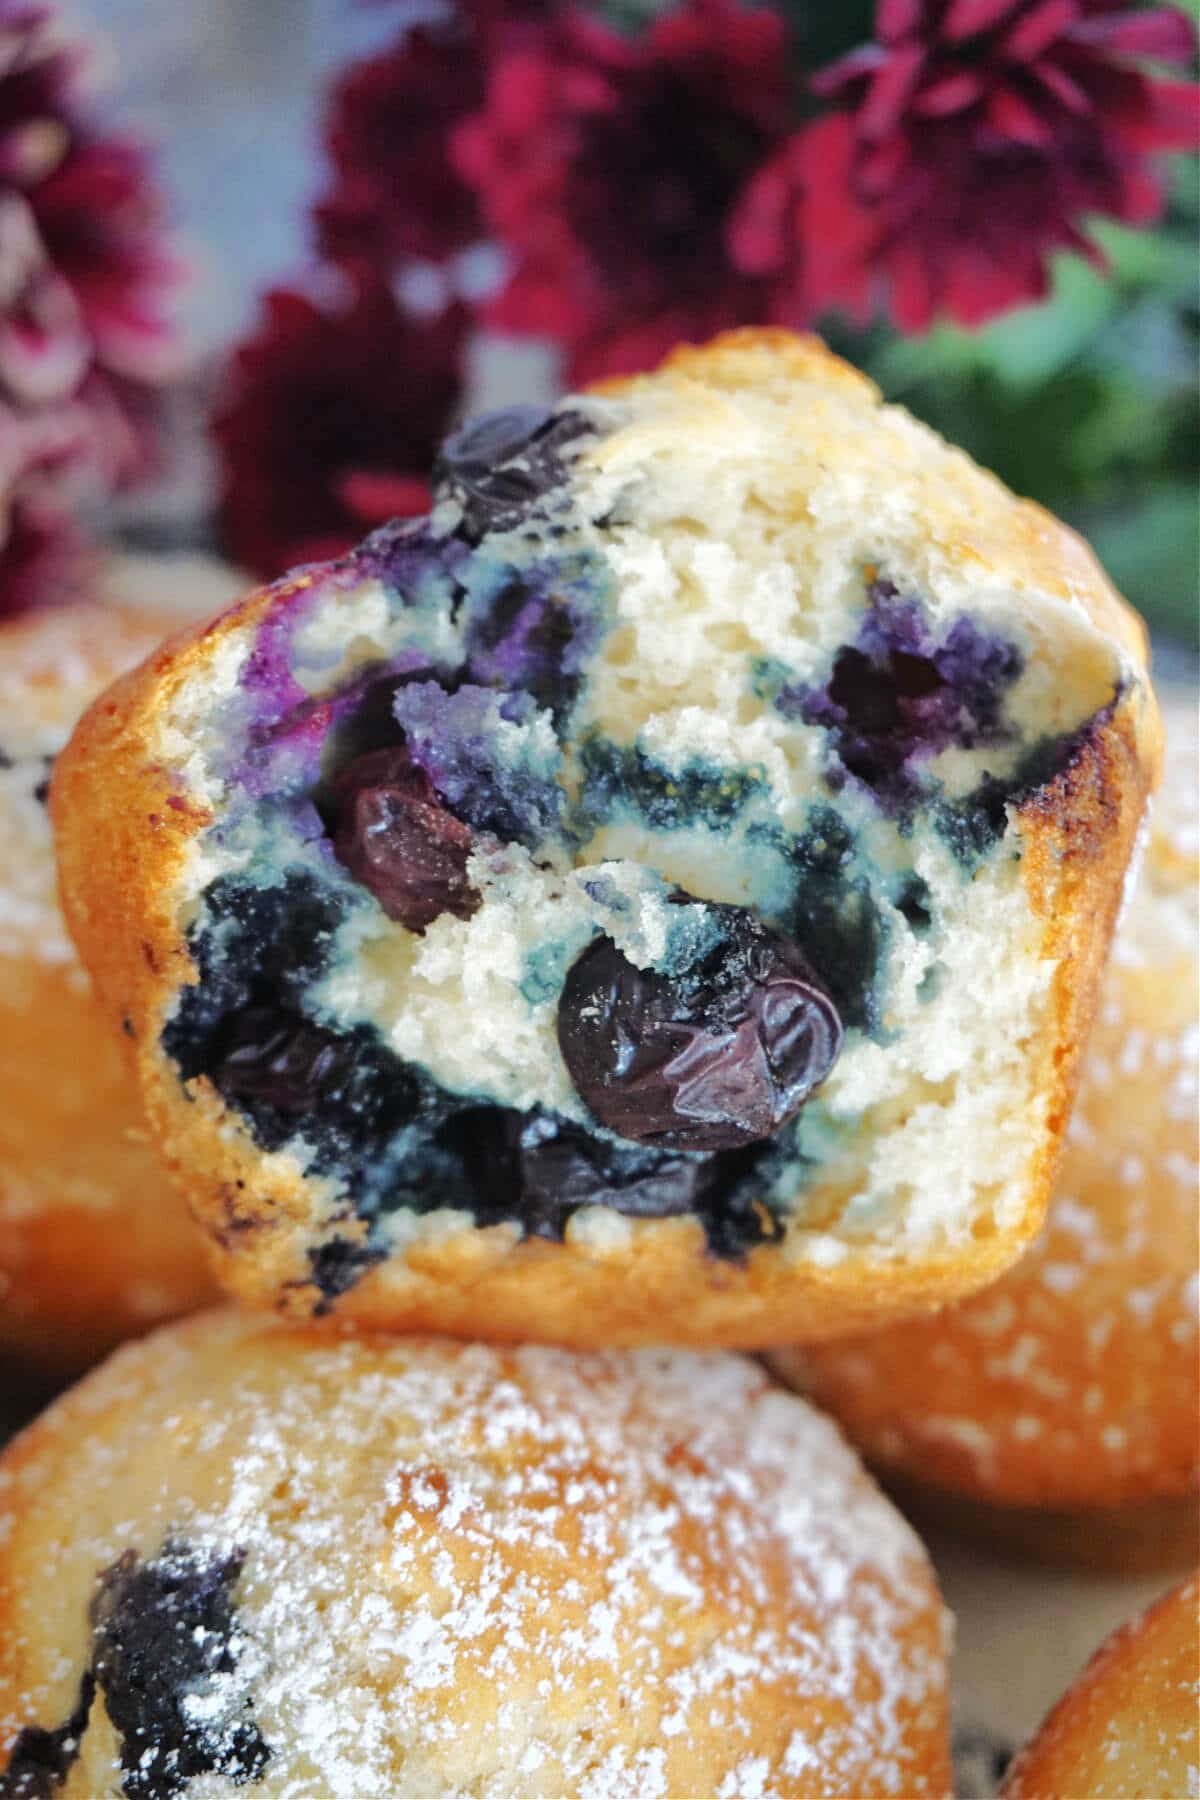 Close-up shot of half a blueberry muffin on top of other muffins.